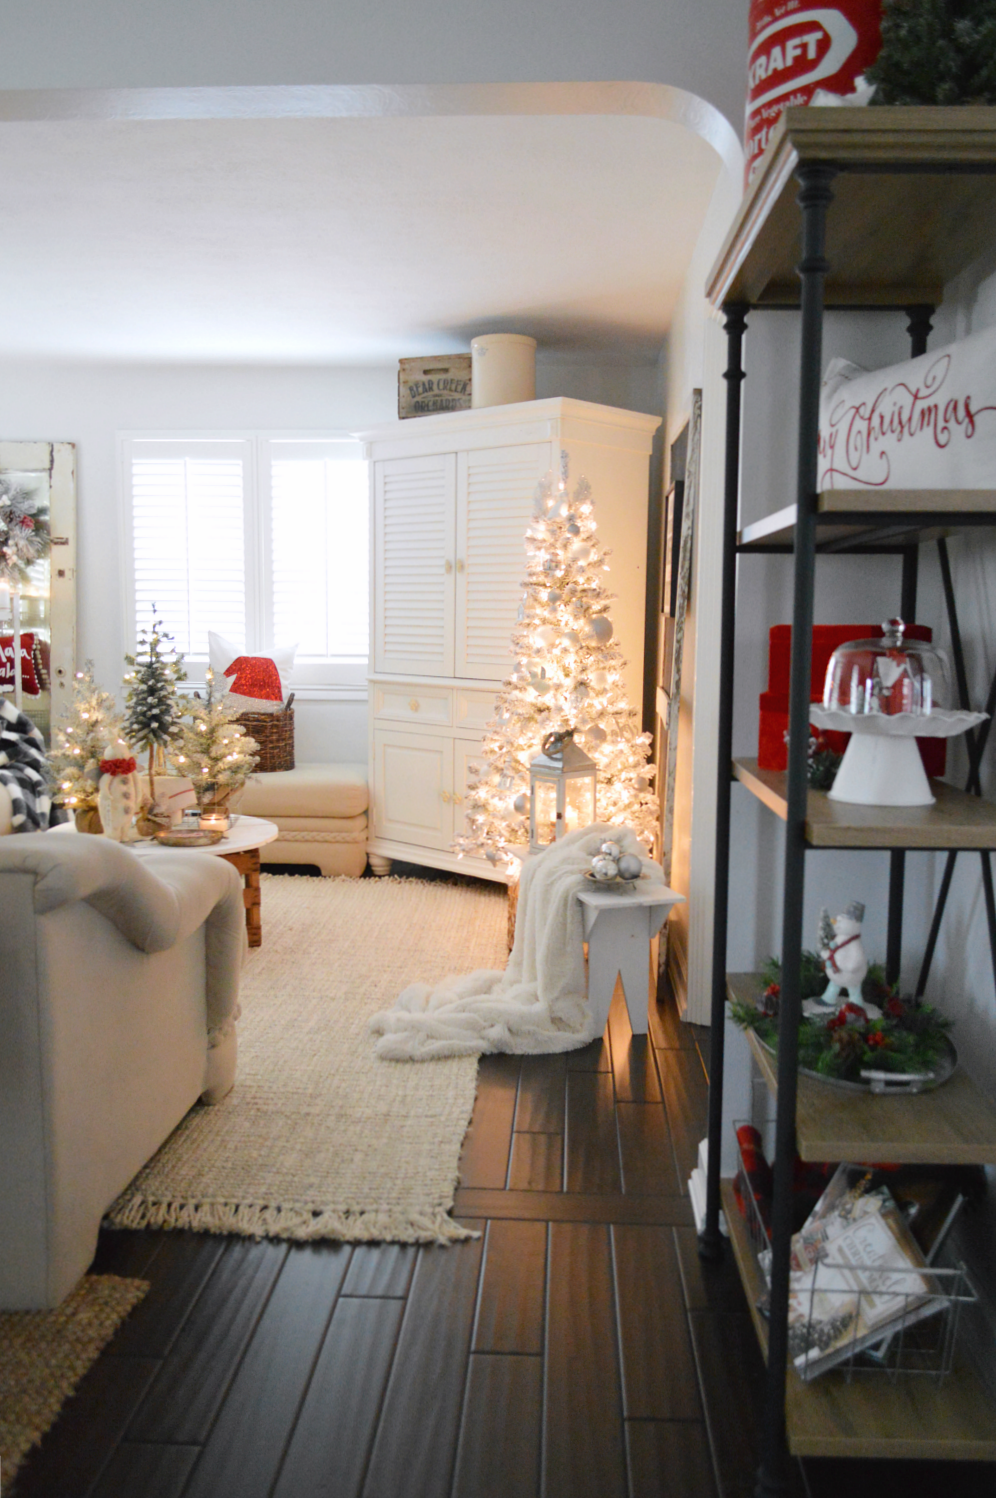 My $30 Flocked Christmas Tree Details - Affordable holiday decorating ideas.